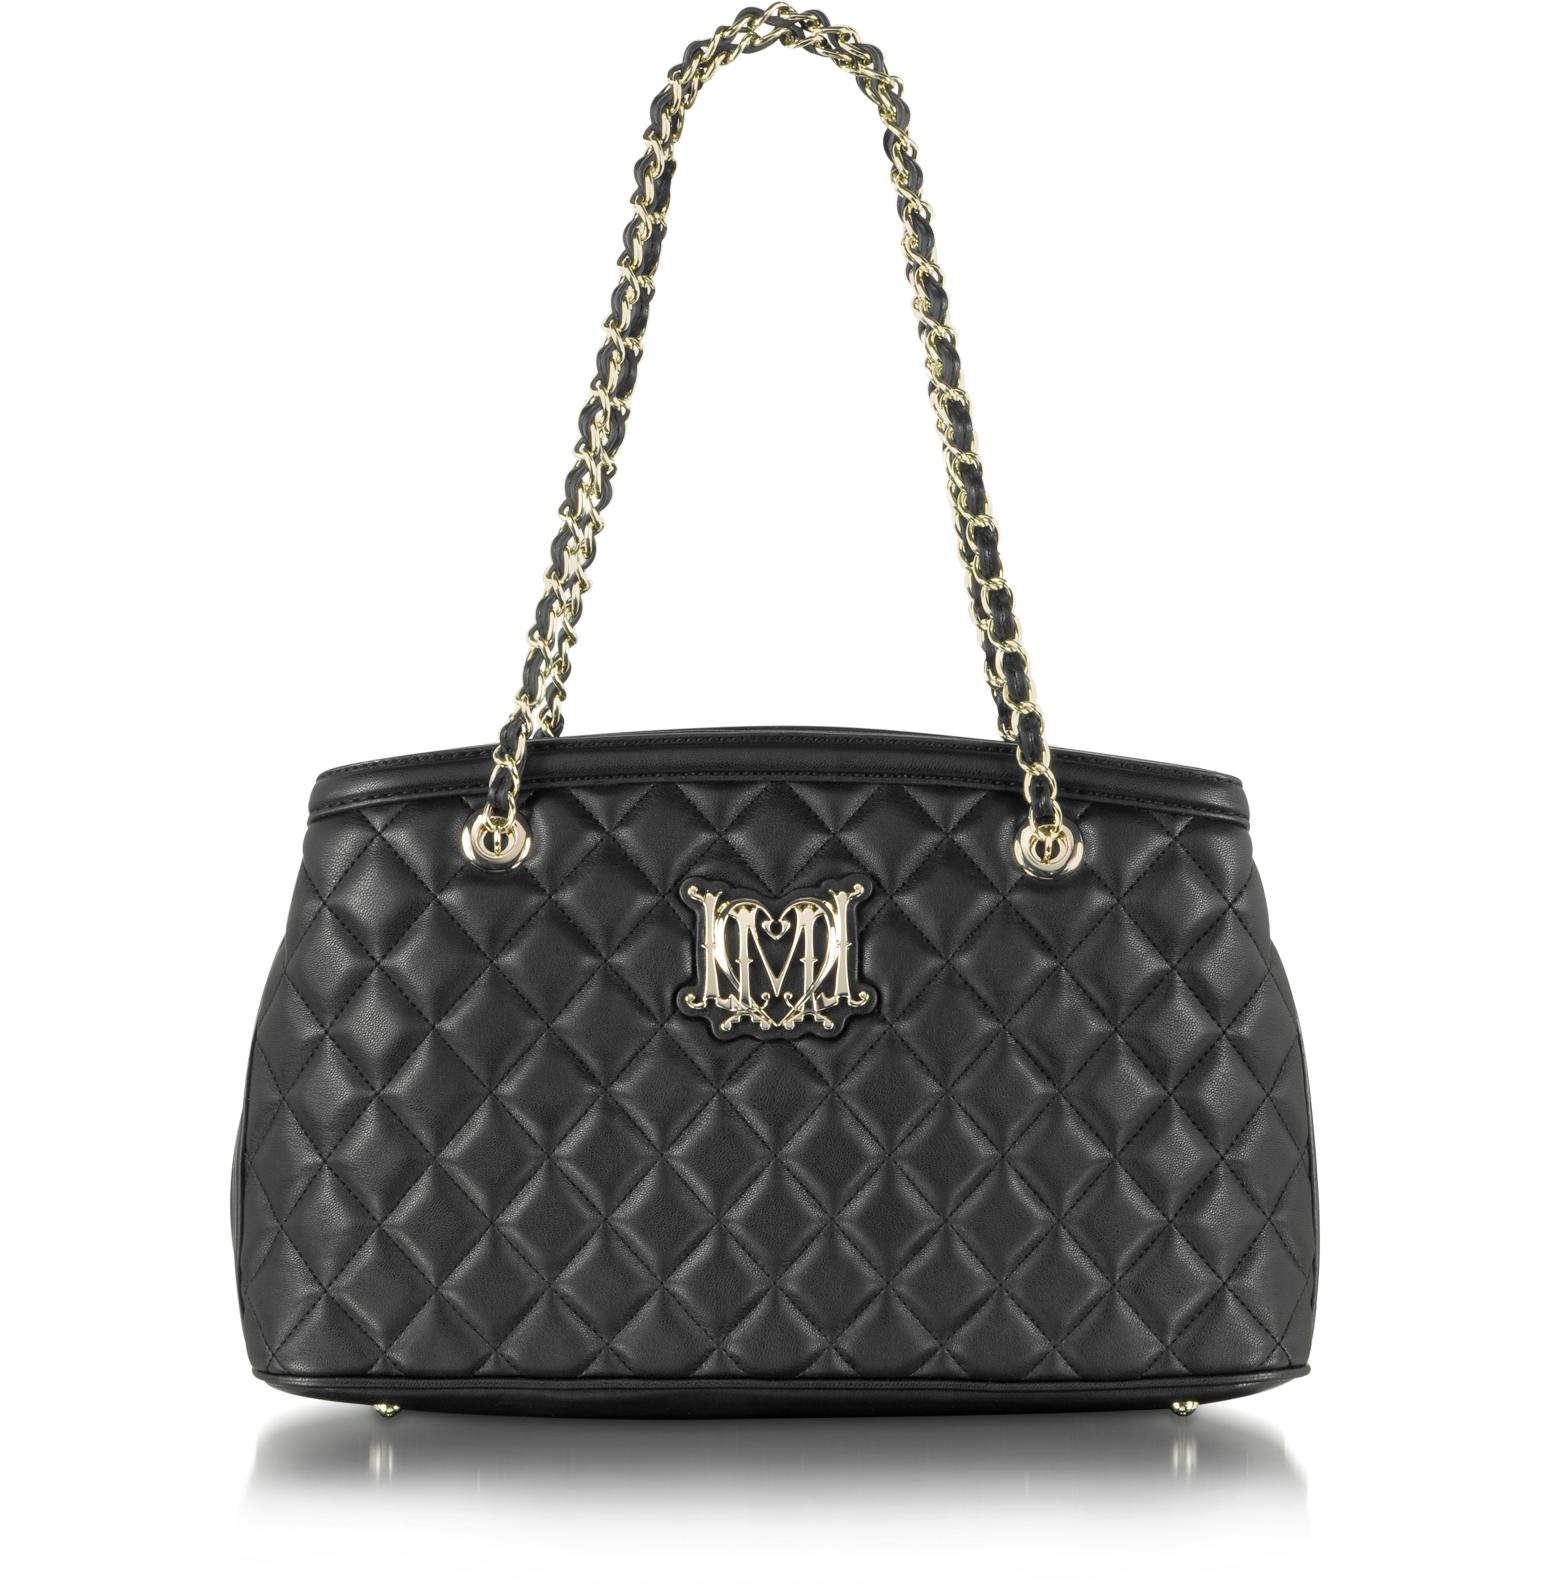 Moschino Love Moschino Black Quilted Eco Leather Satchel at FORZIERI